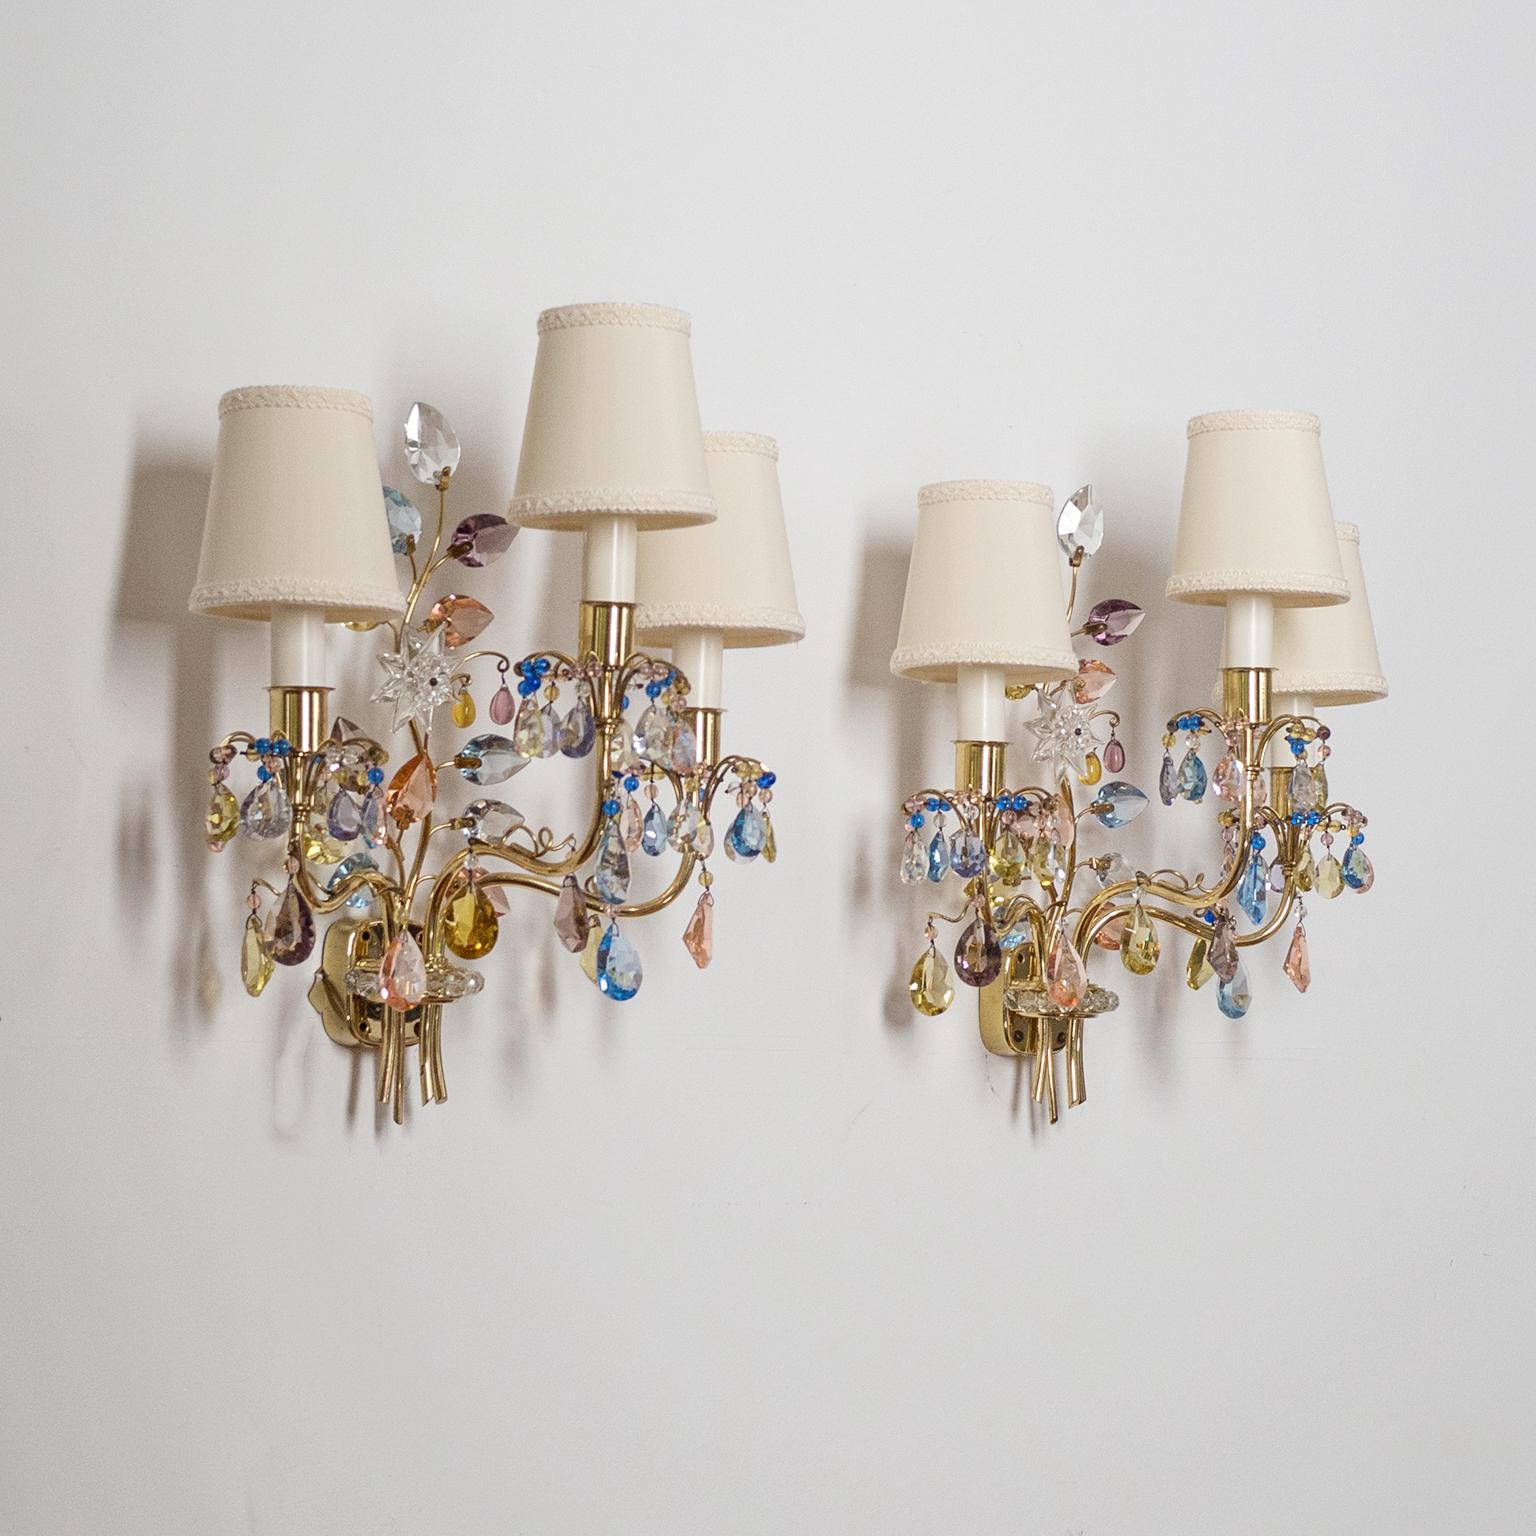 J&L Lobmeyr Wall Lights, 1950s, Colored Crystal and Brass 10